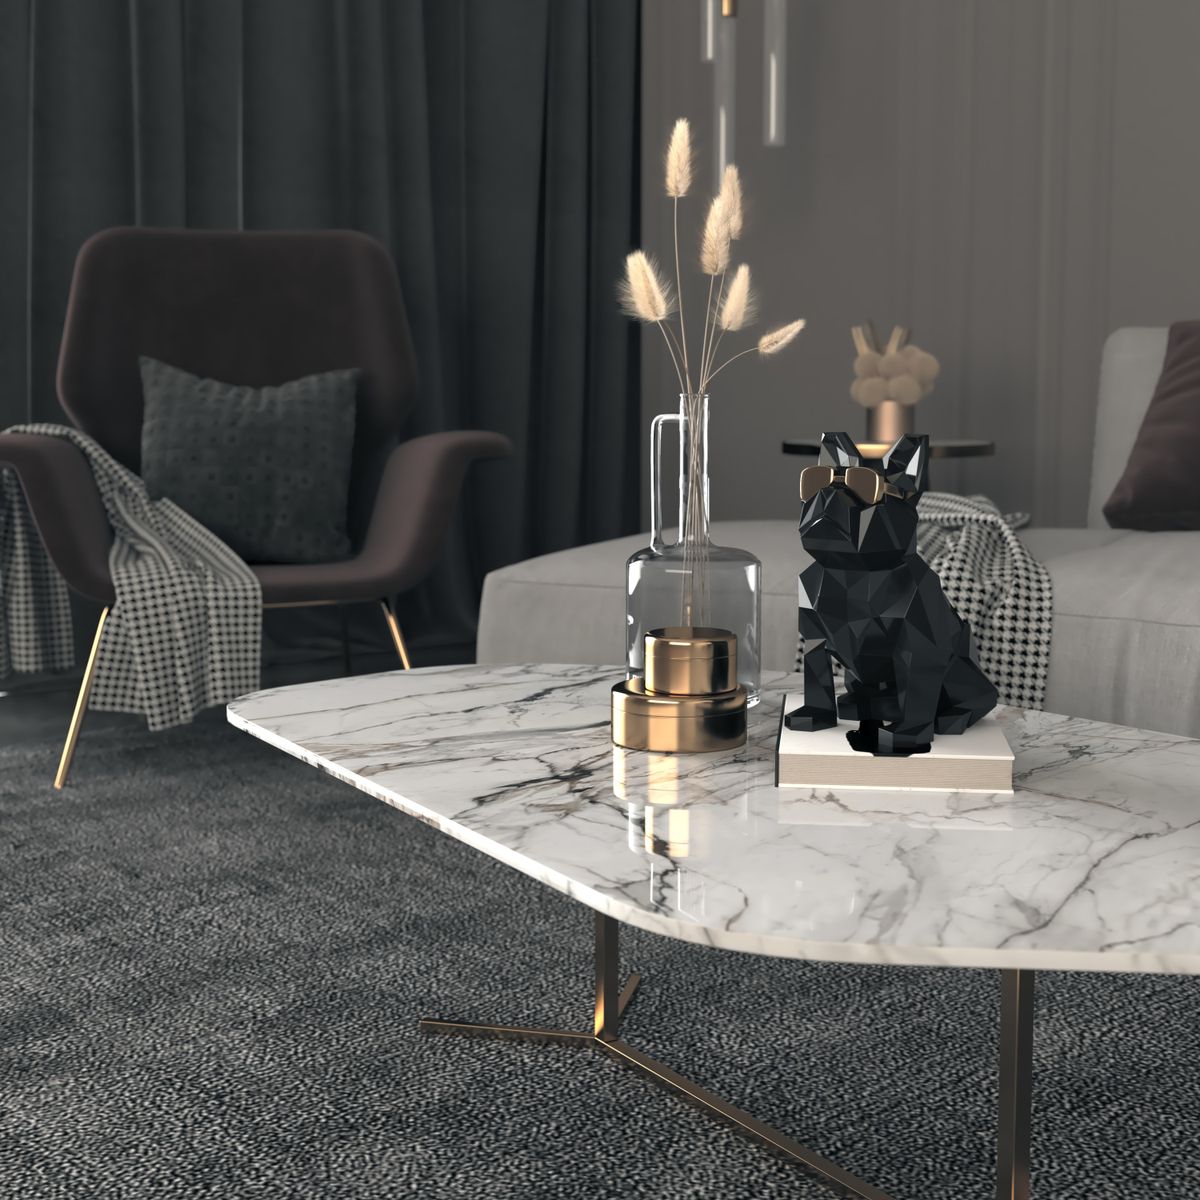 Marble coffee table, glass vase with dried grass, black pug statue wearing gold sunglasses sitting on book - Pakenham Suburb Profile